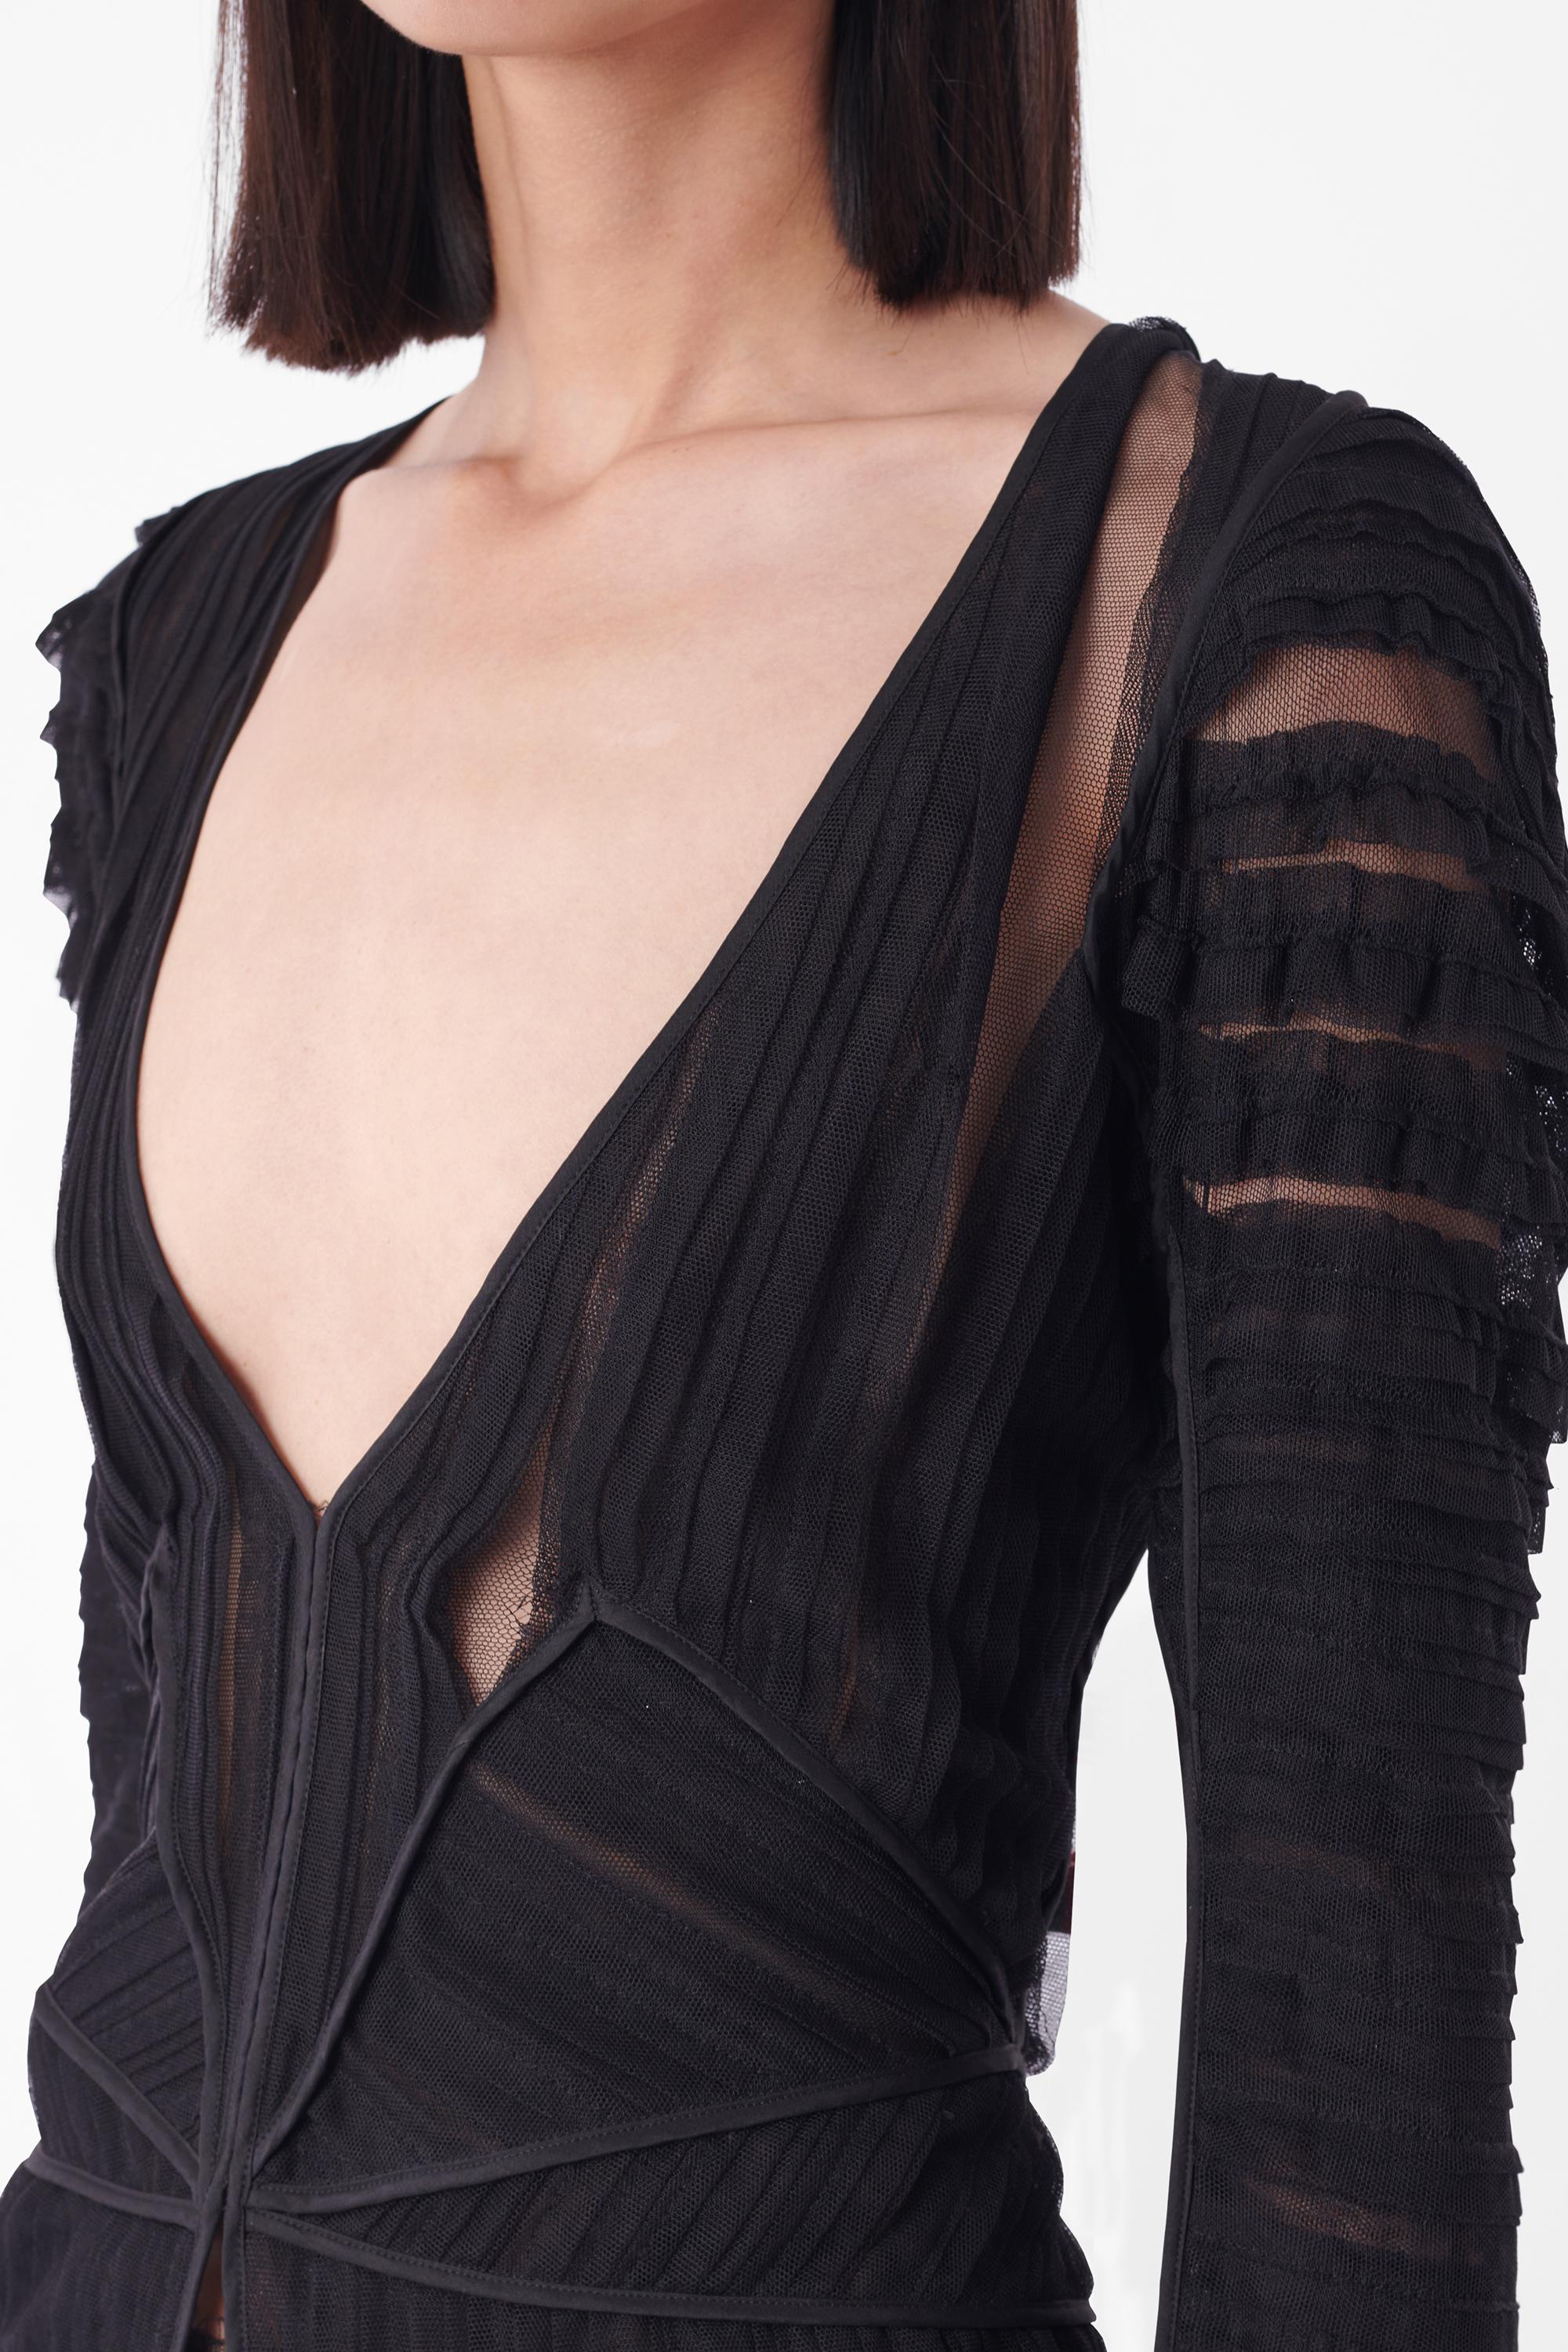 Tom Ford for Yves Saint Laurent Fall Winter 2002 black blouse, runway look 8. Features deep v-front, sheer pleat design allover, split flared cuffs, piped edges with small split centre front and zip back closure. In excellent vintage